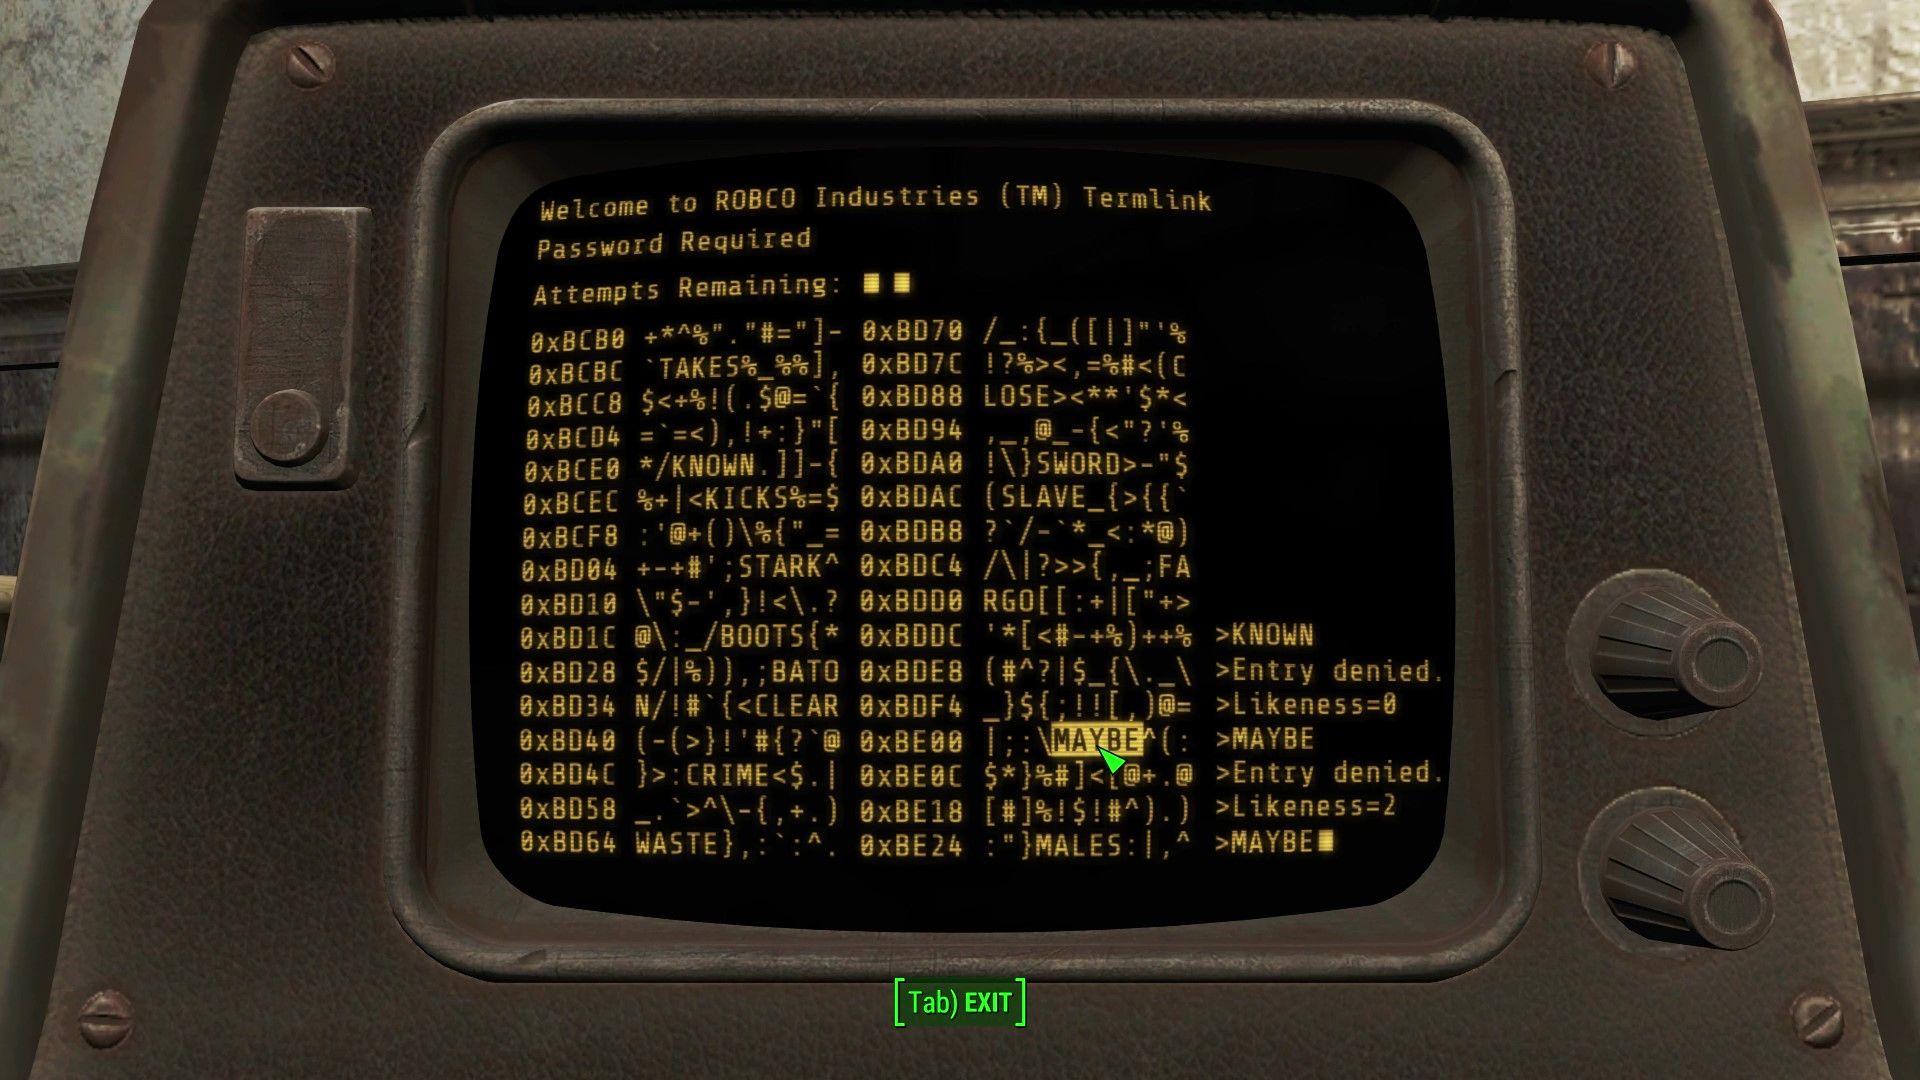 Fallout 4: Hacking Guide To All Terminal Passwords